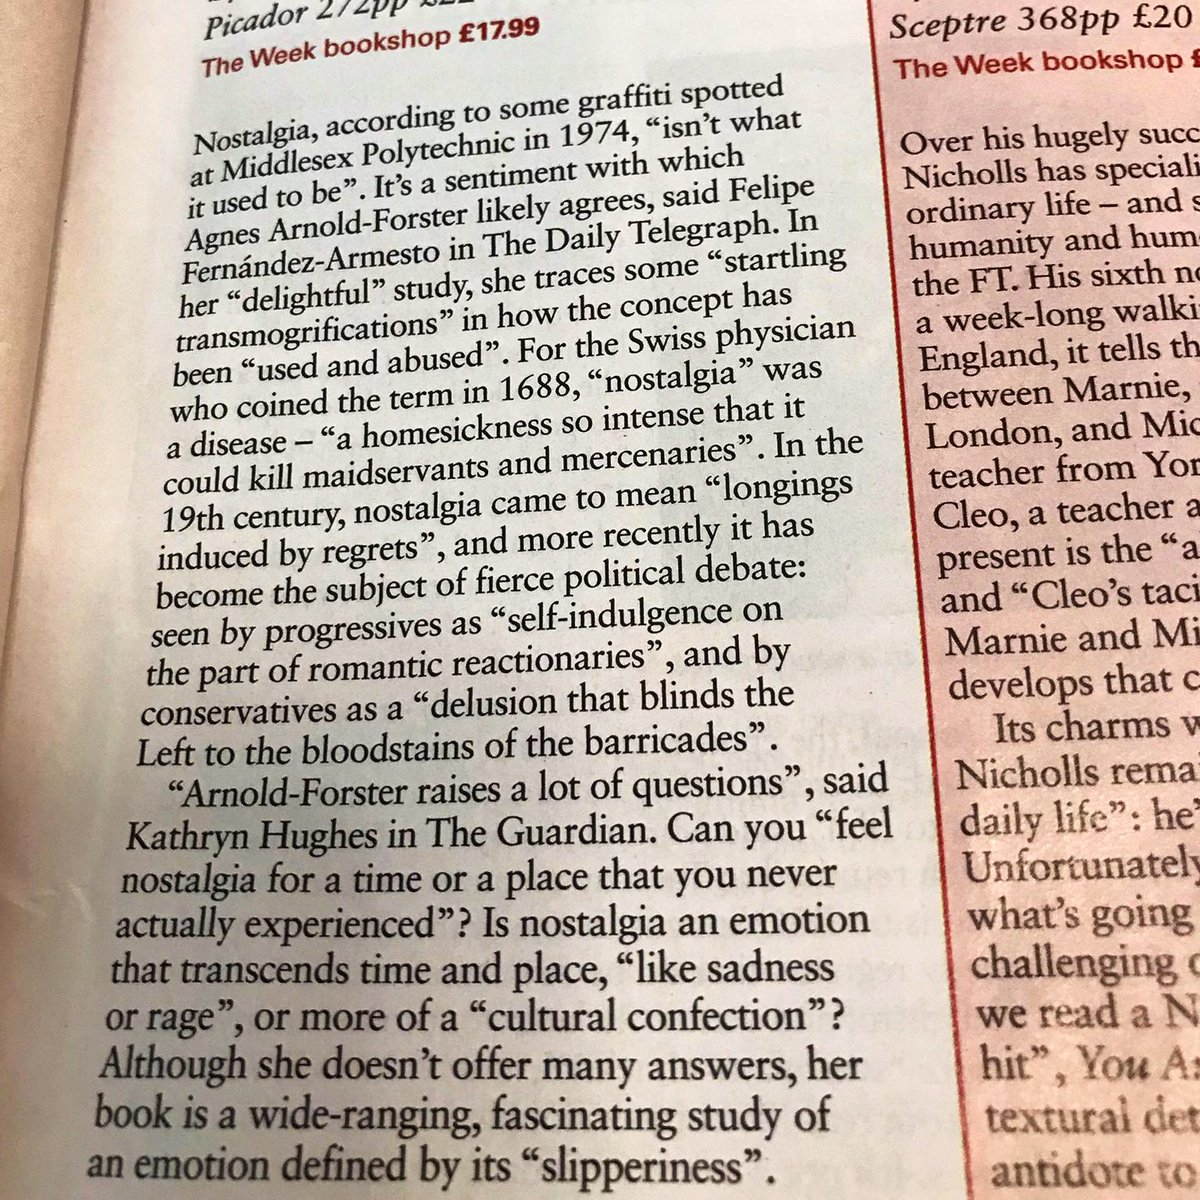 Review of reviews in @TheWeek !